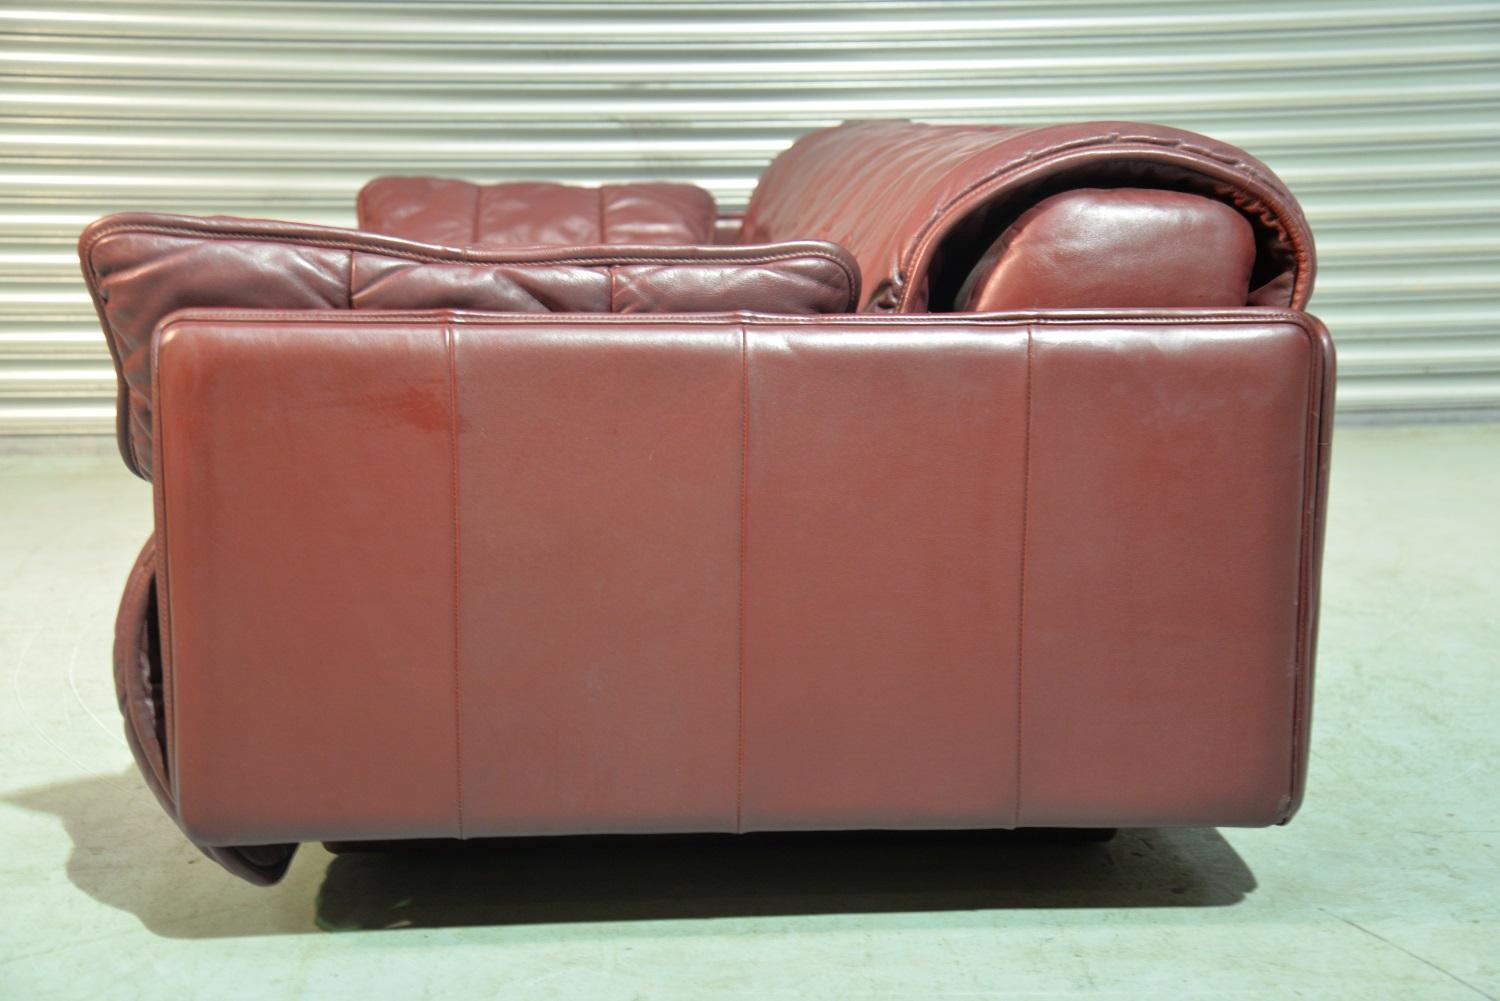 Vintage De Sede Patchwork Leather Sofa or Daybed, Switzerland, 1970s For Sale 4